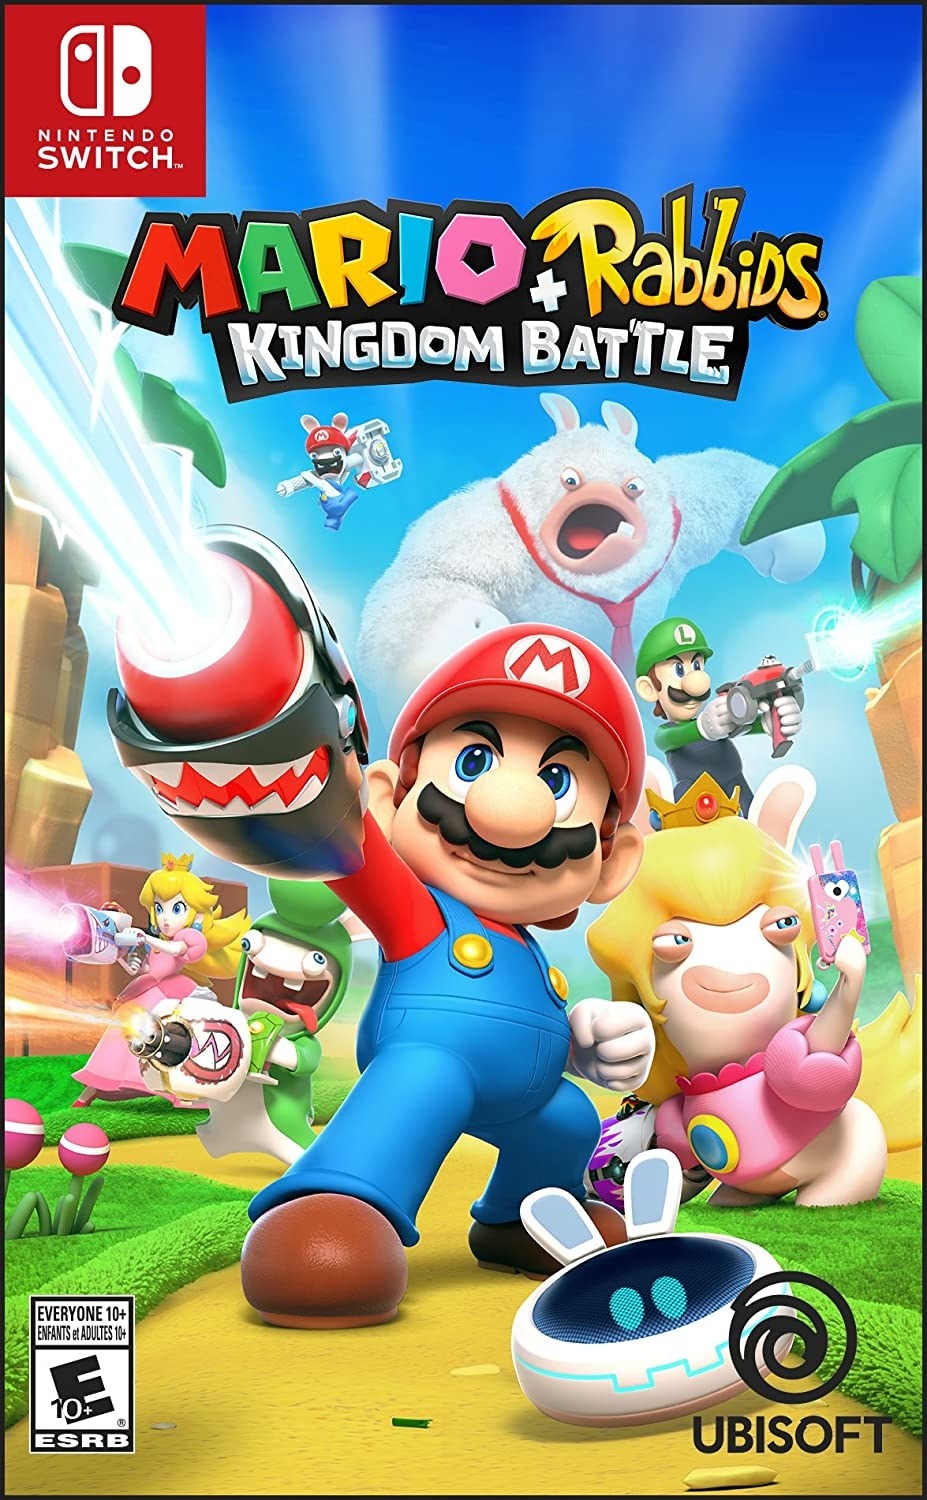 The cover of the game with a picture of Mario holding a gun